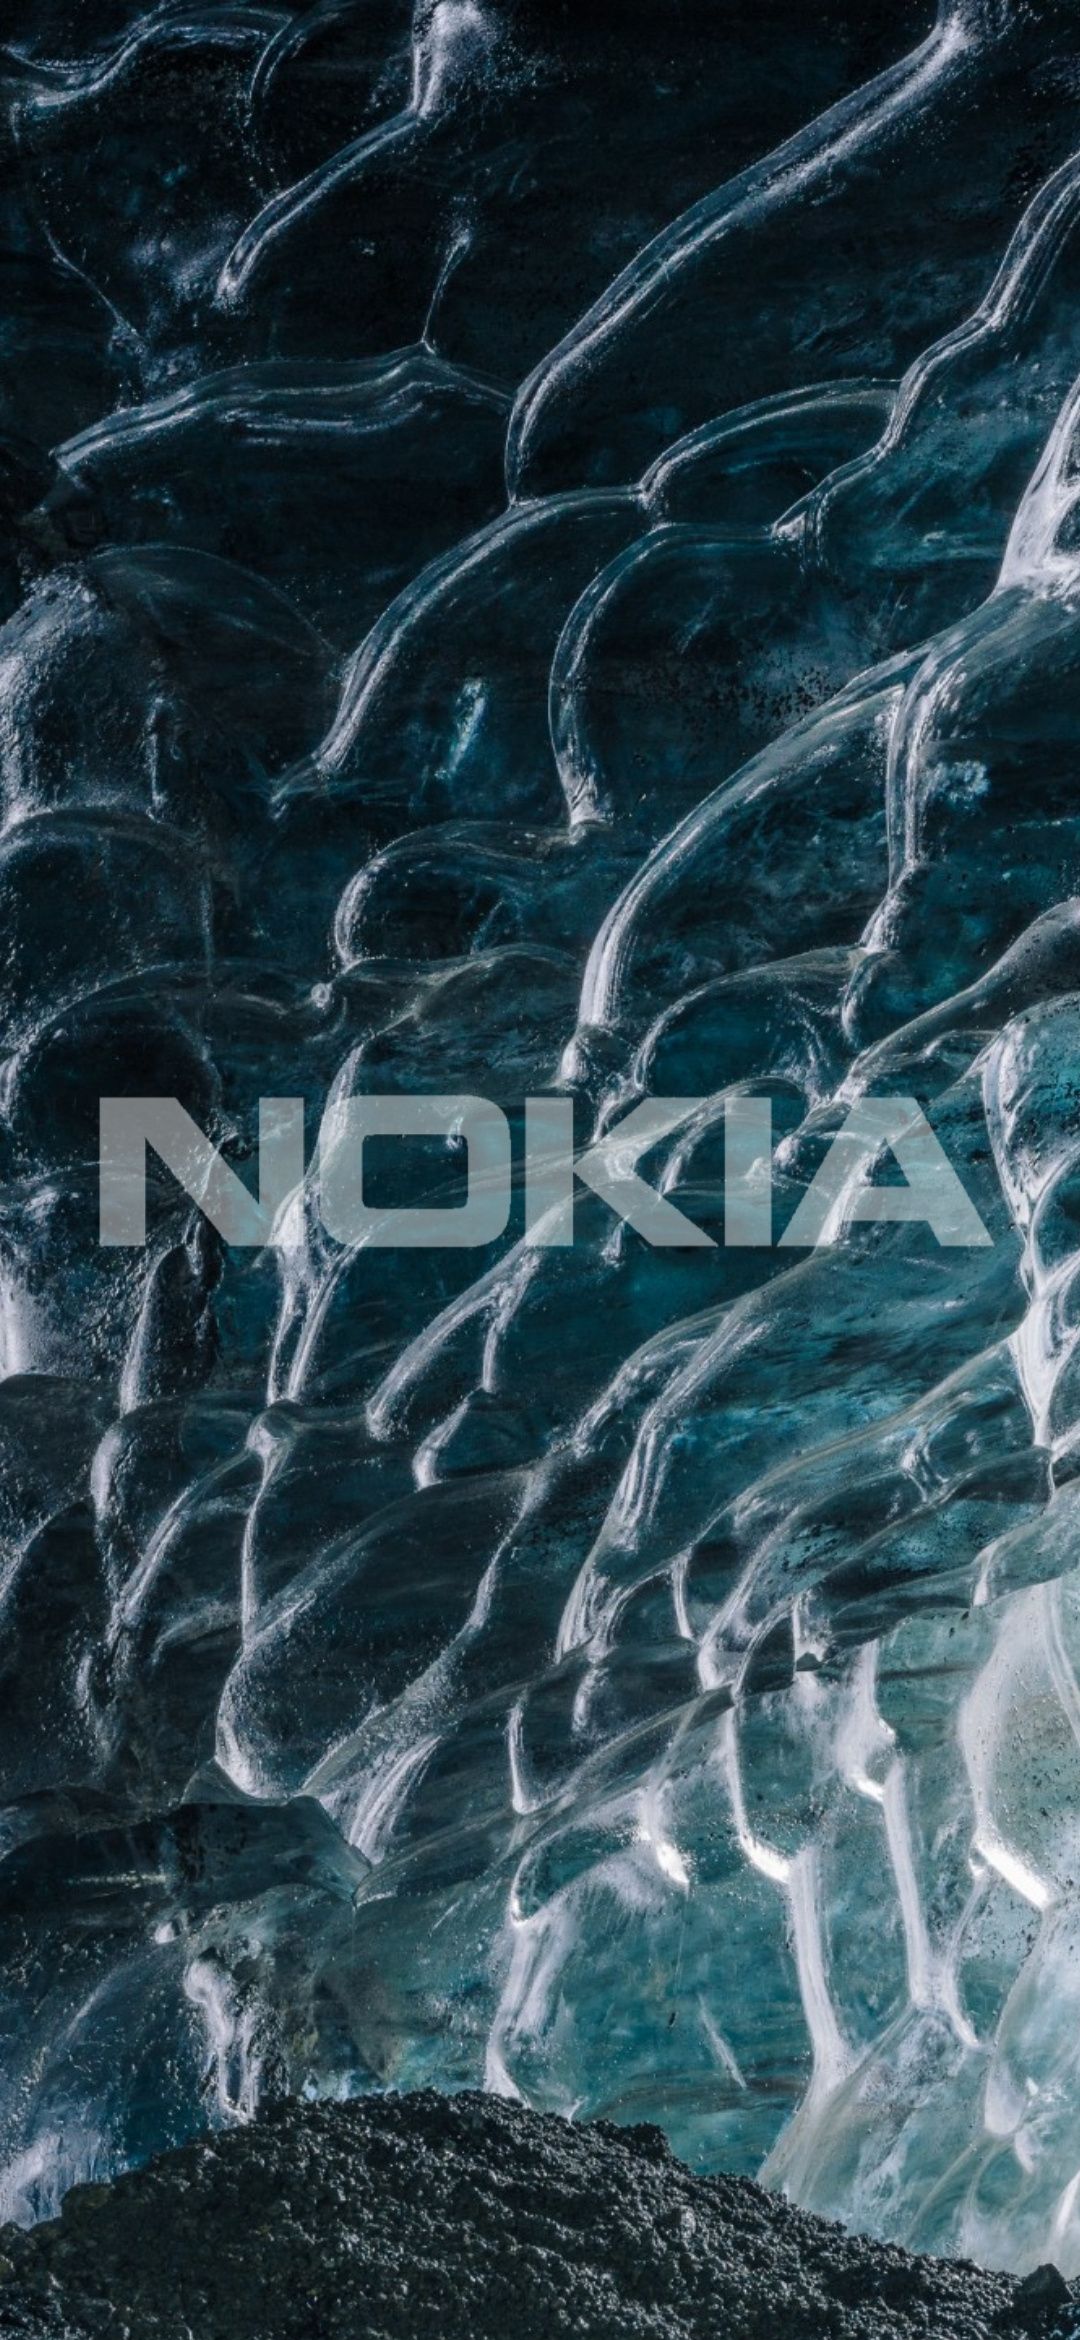 Nokia 8 sirocco cave wallpaper in homepage